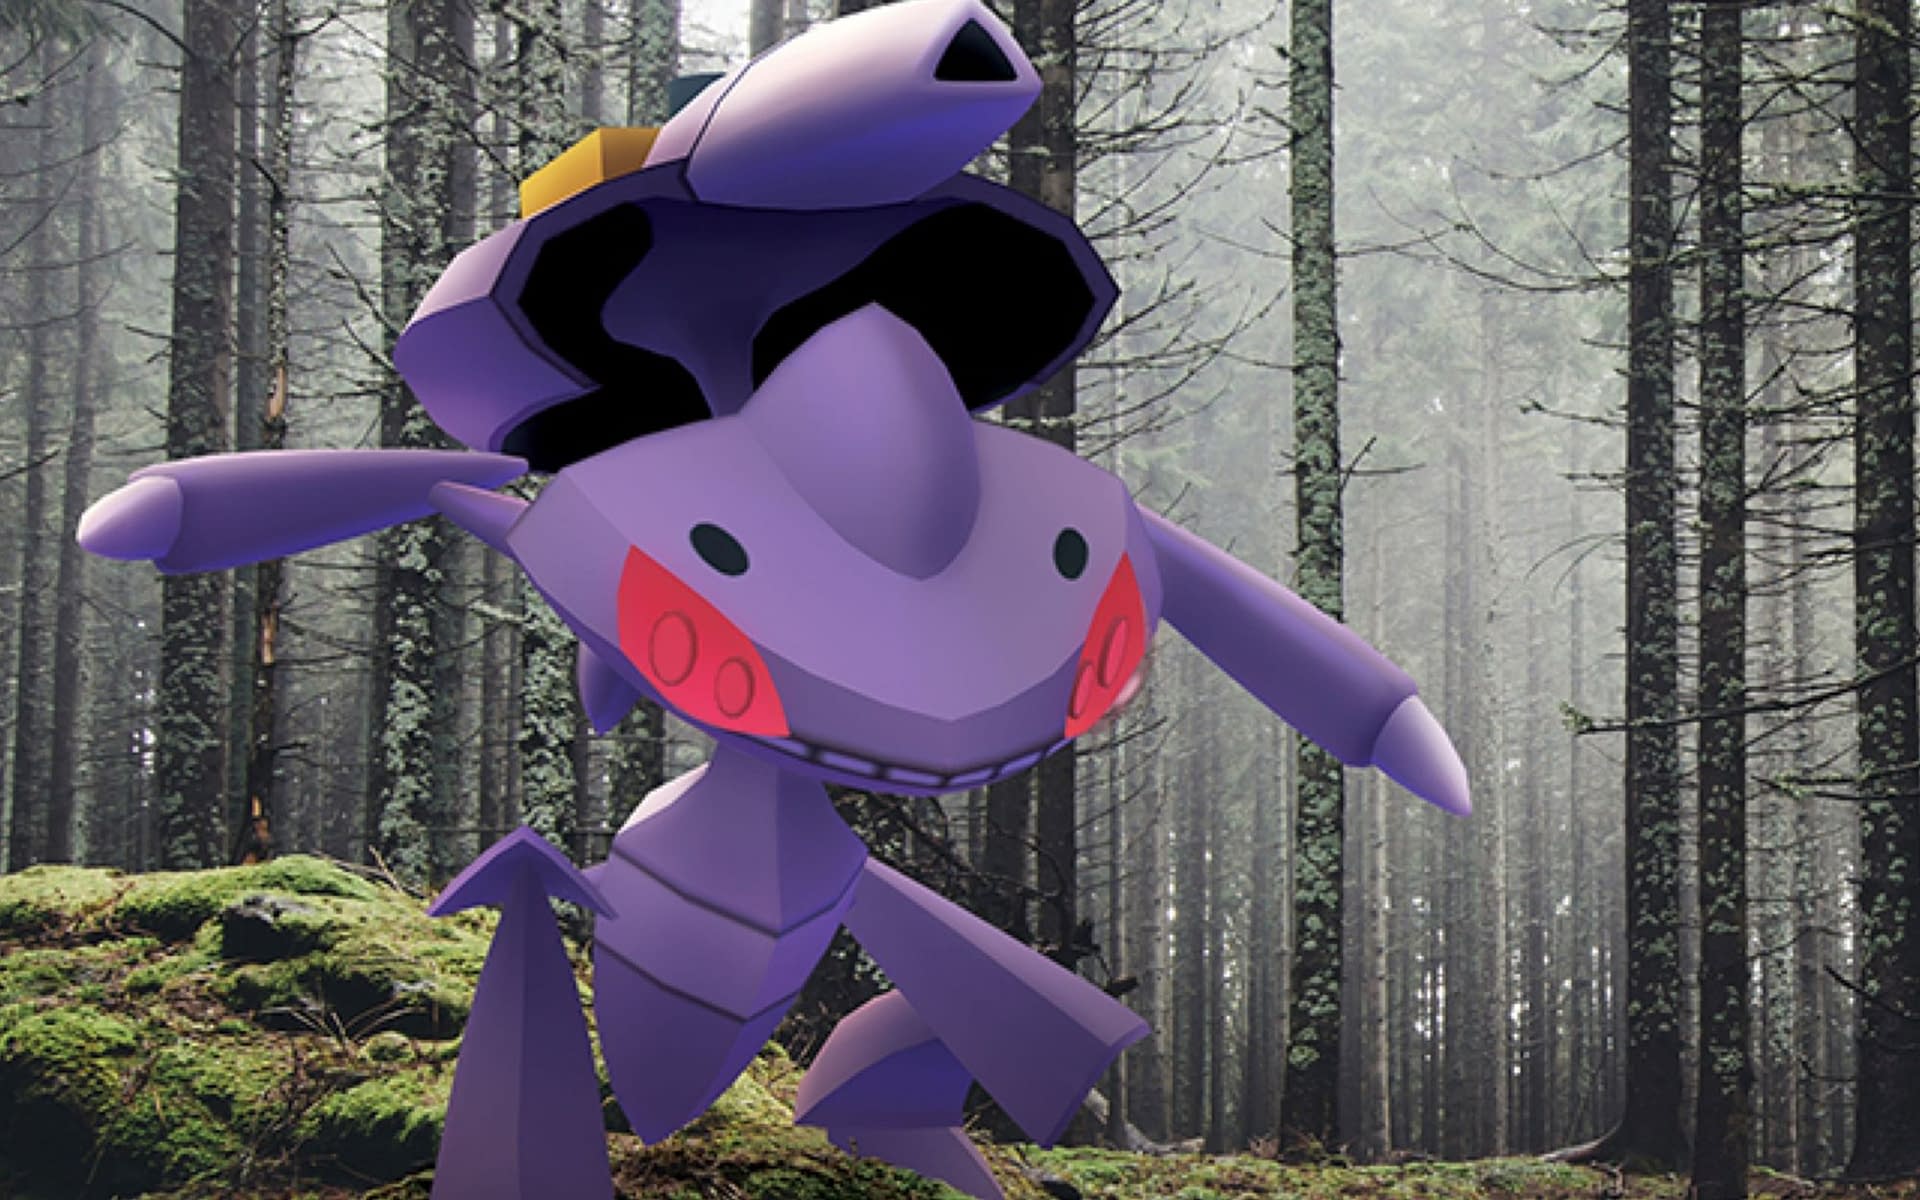 The best moveset for Genesect in Pokemon GO